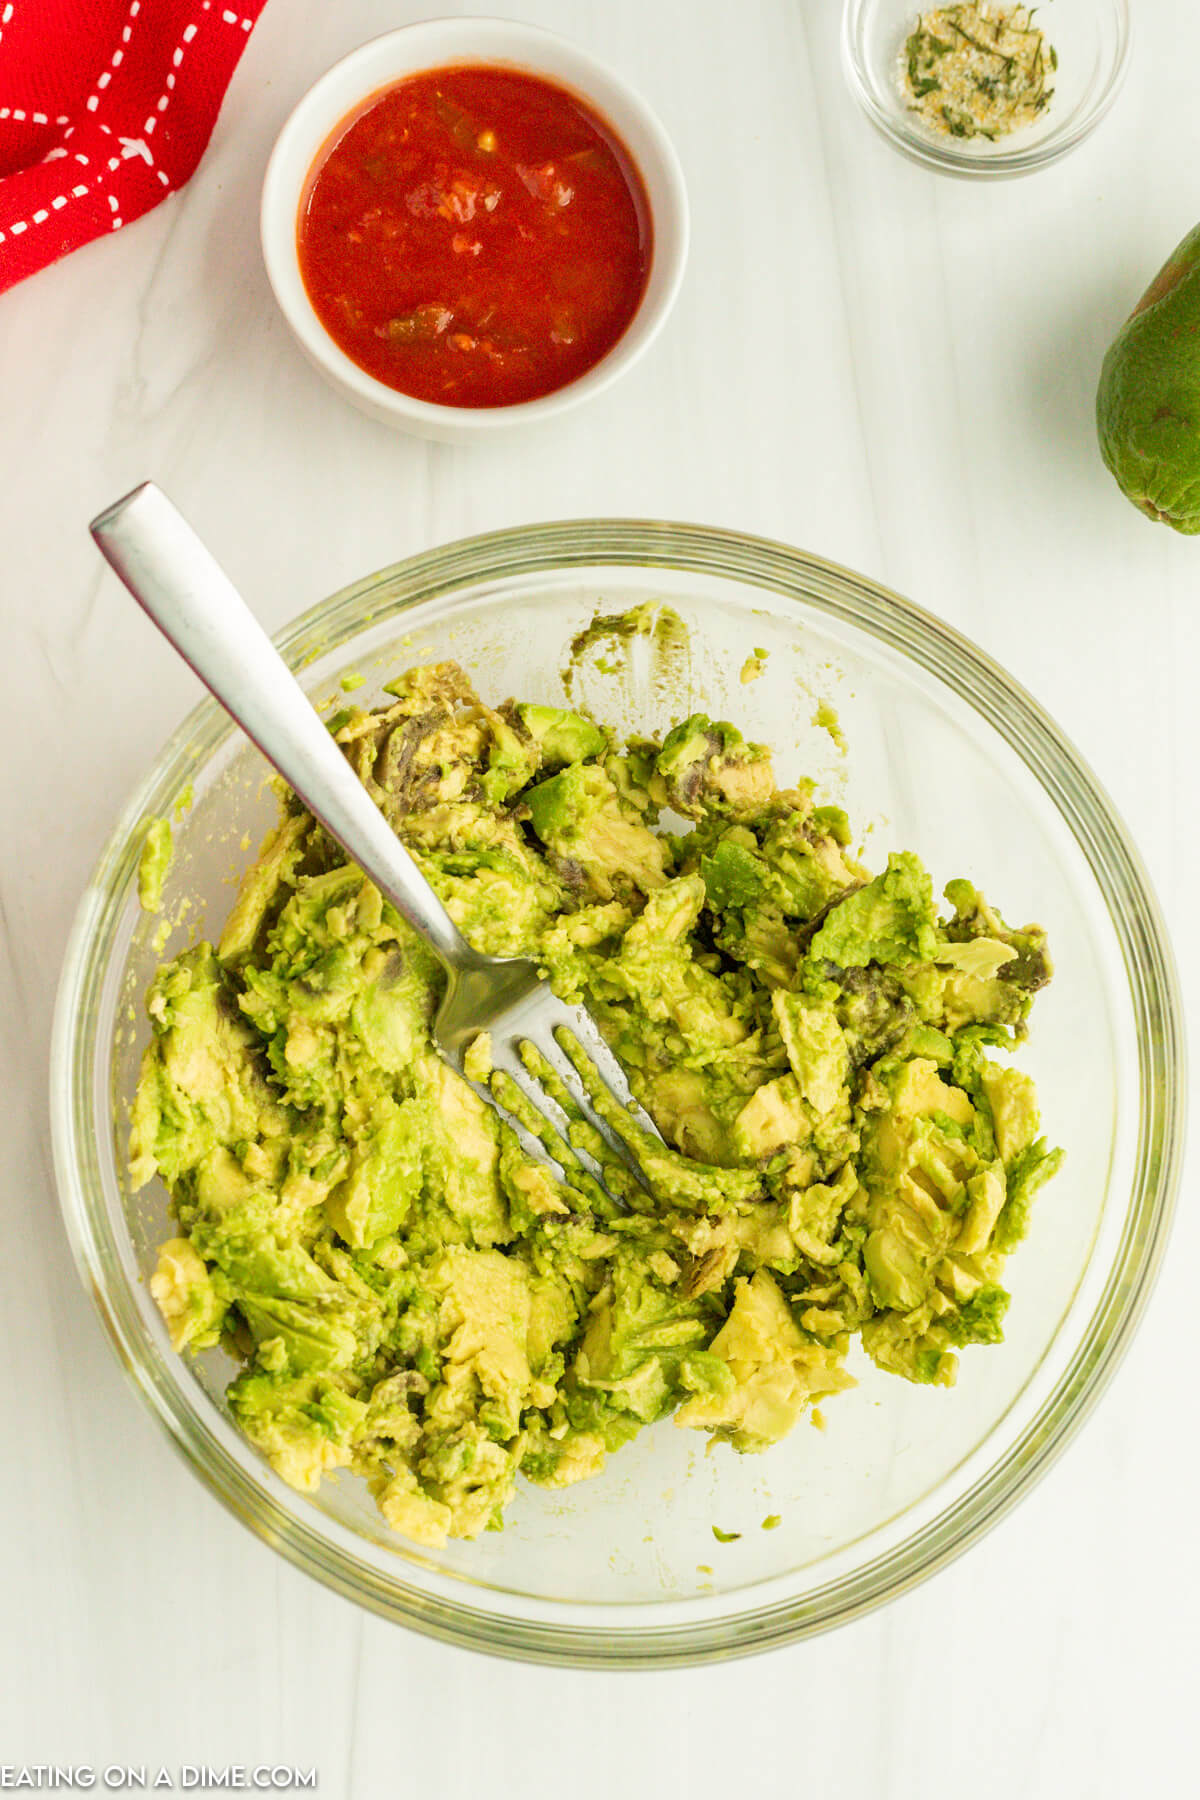 Mashing avocado in a bowl with a fork